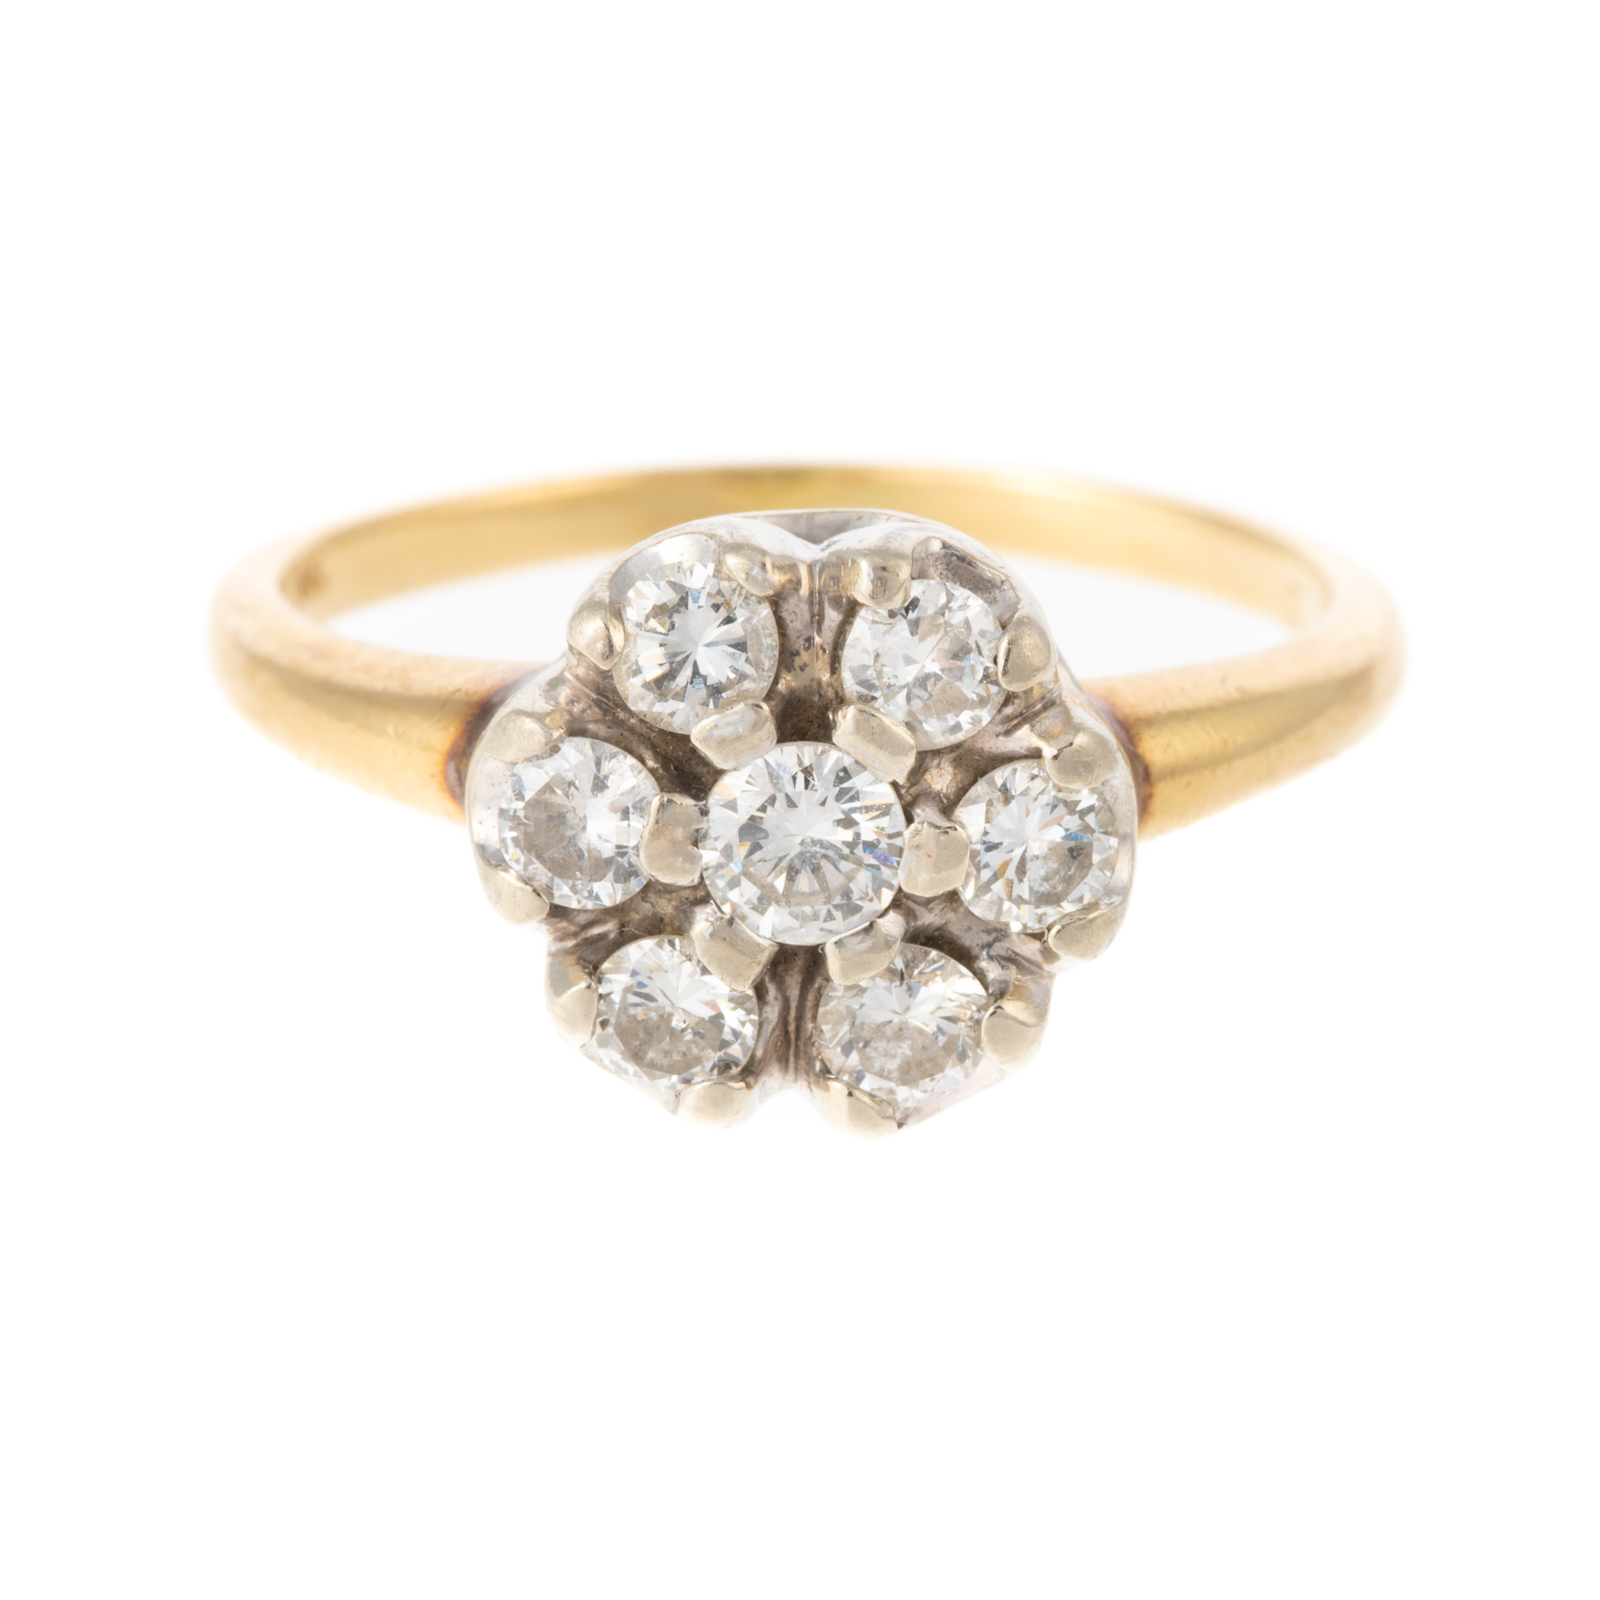 A DIAMOND CLUSTER RING IN 14K 14K 3386a6